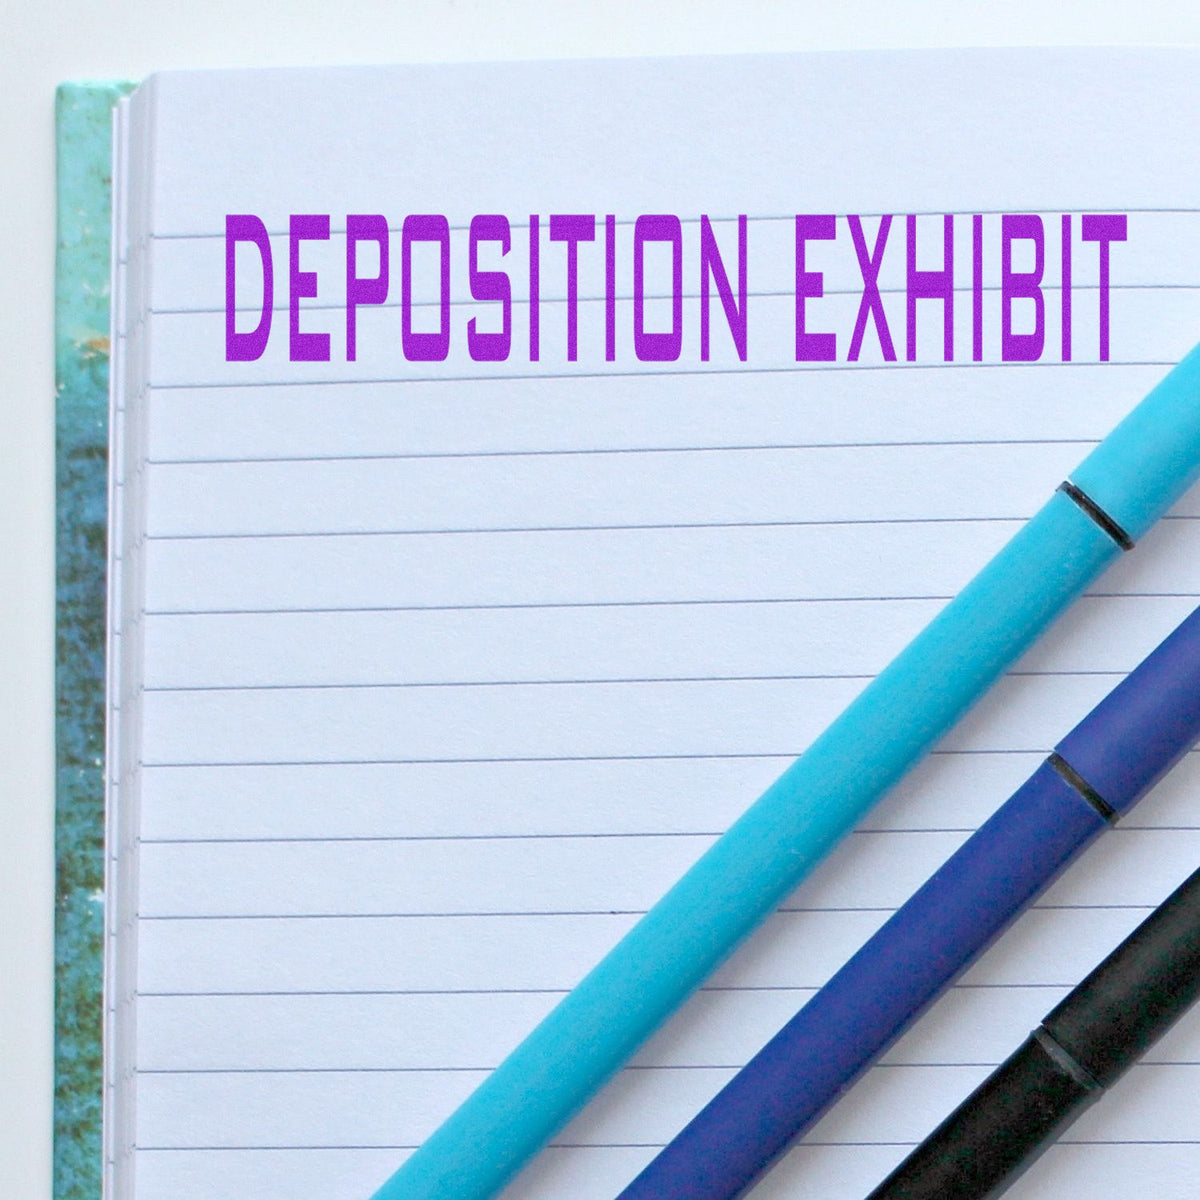 Deposition Exhibit Rubber Stamp In Use